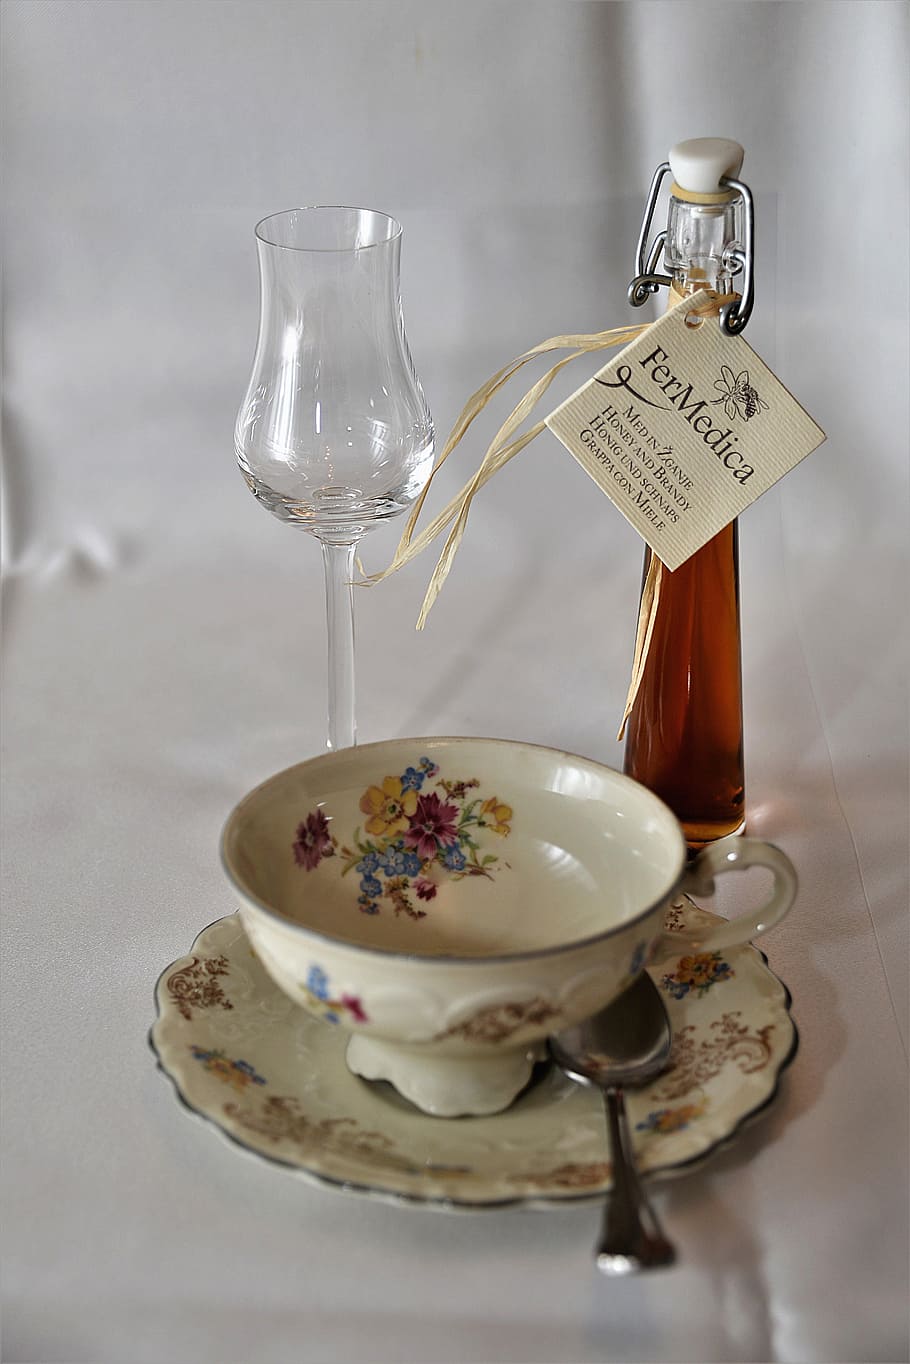 white, floral, cup, saucer, liqueur, coffee cup, glass, benefit from, enjoy, food and drink